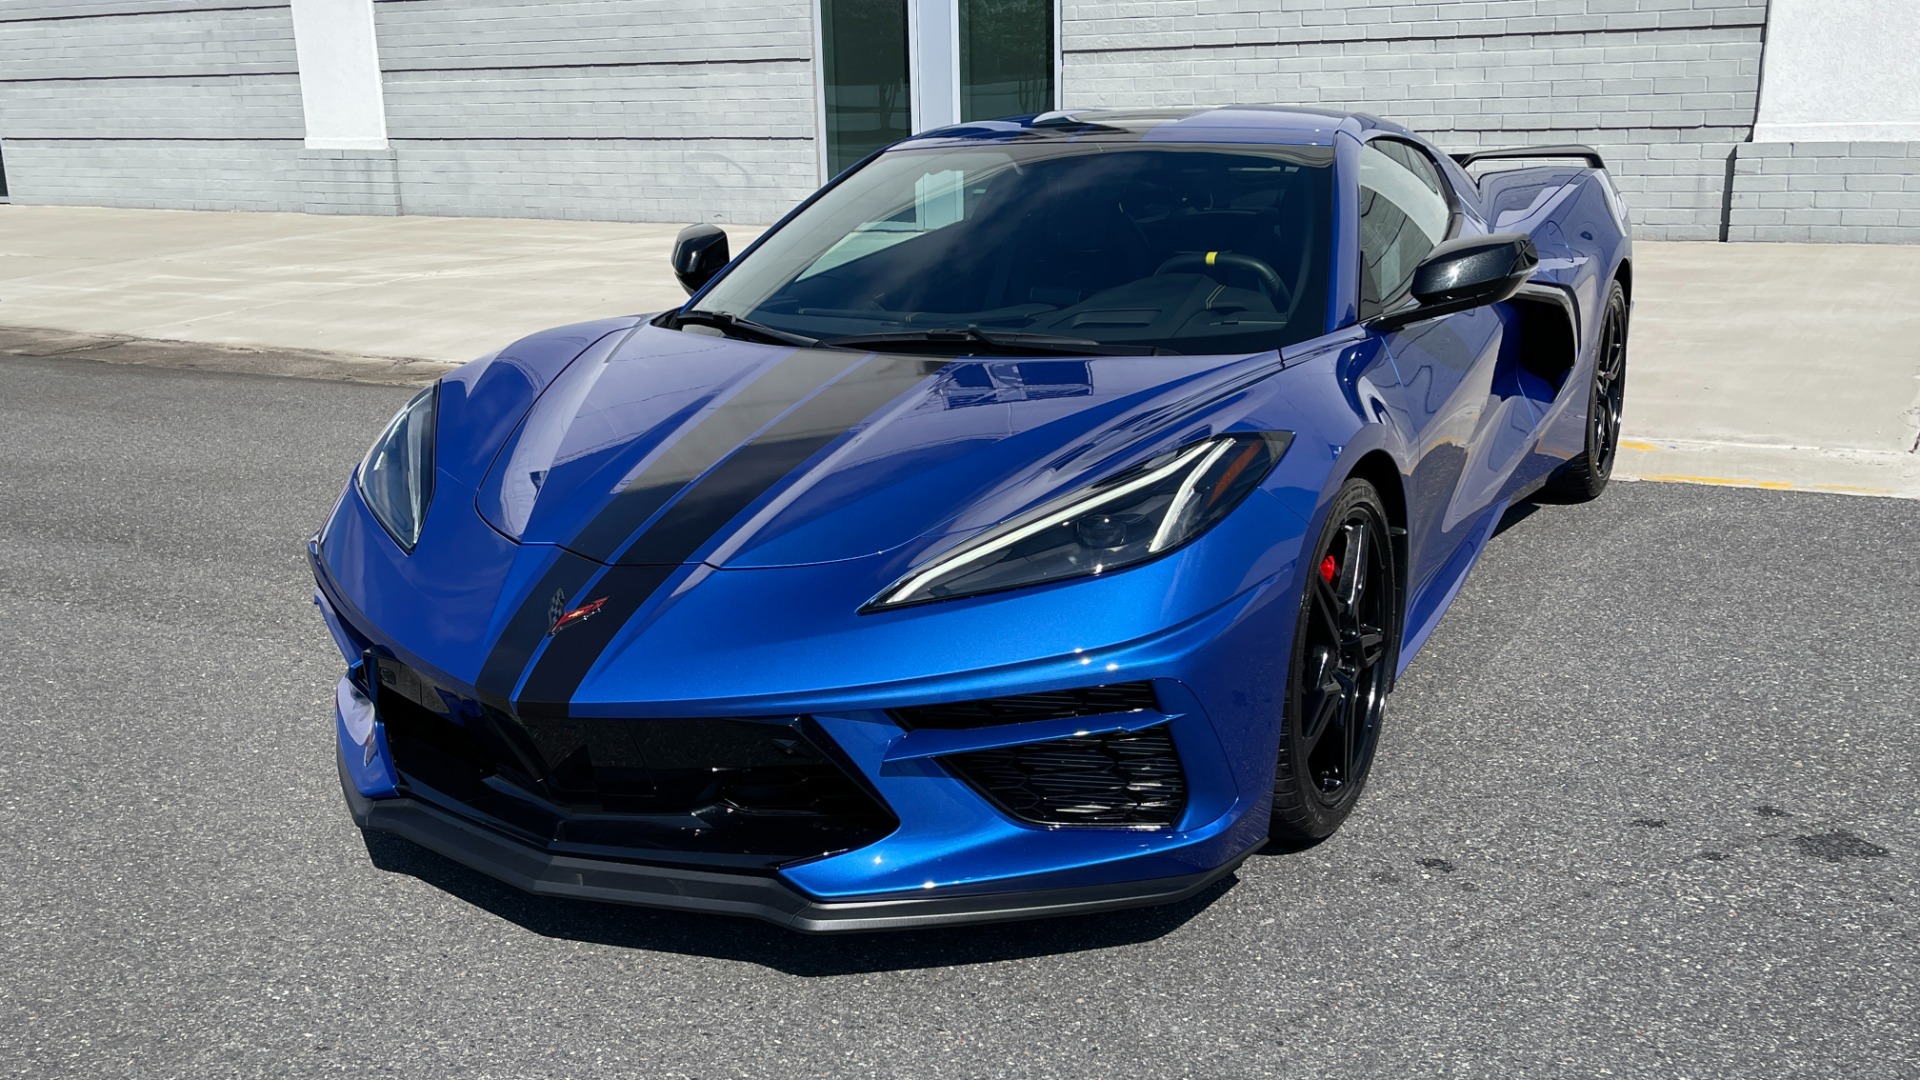 Used 2021 Chevrolet CORVETTE STINGRAY 3LT COUPE / 8-SPD / PERF PKG / NAV / BOSE / REARVIEW for sale Sold at Formula Imports in Charlotte NC 28227 14